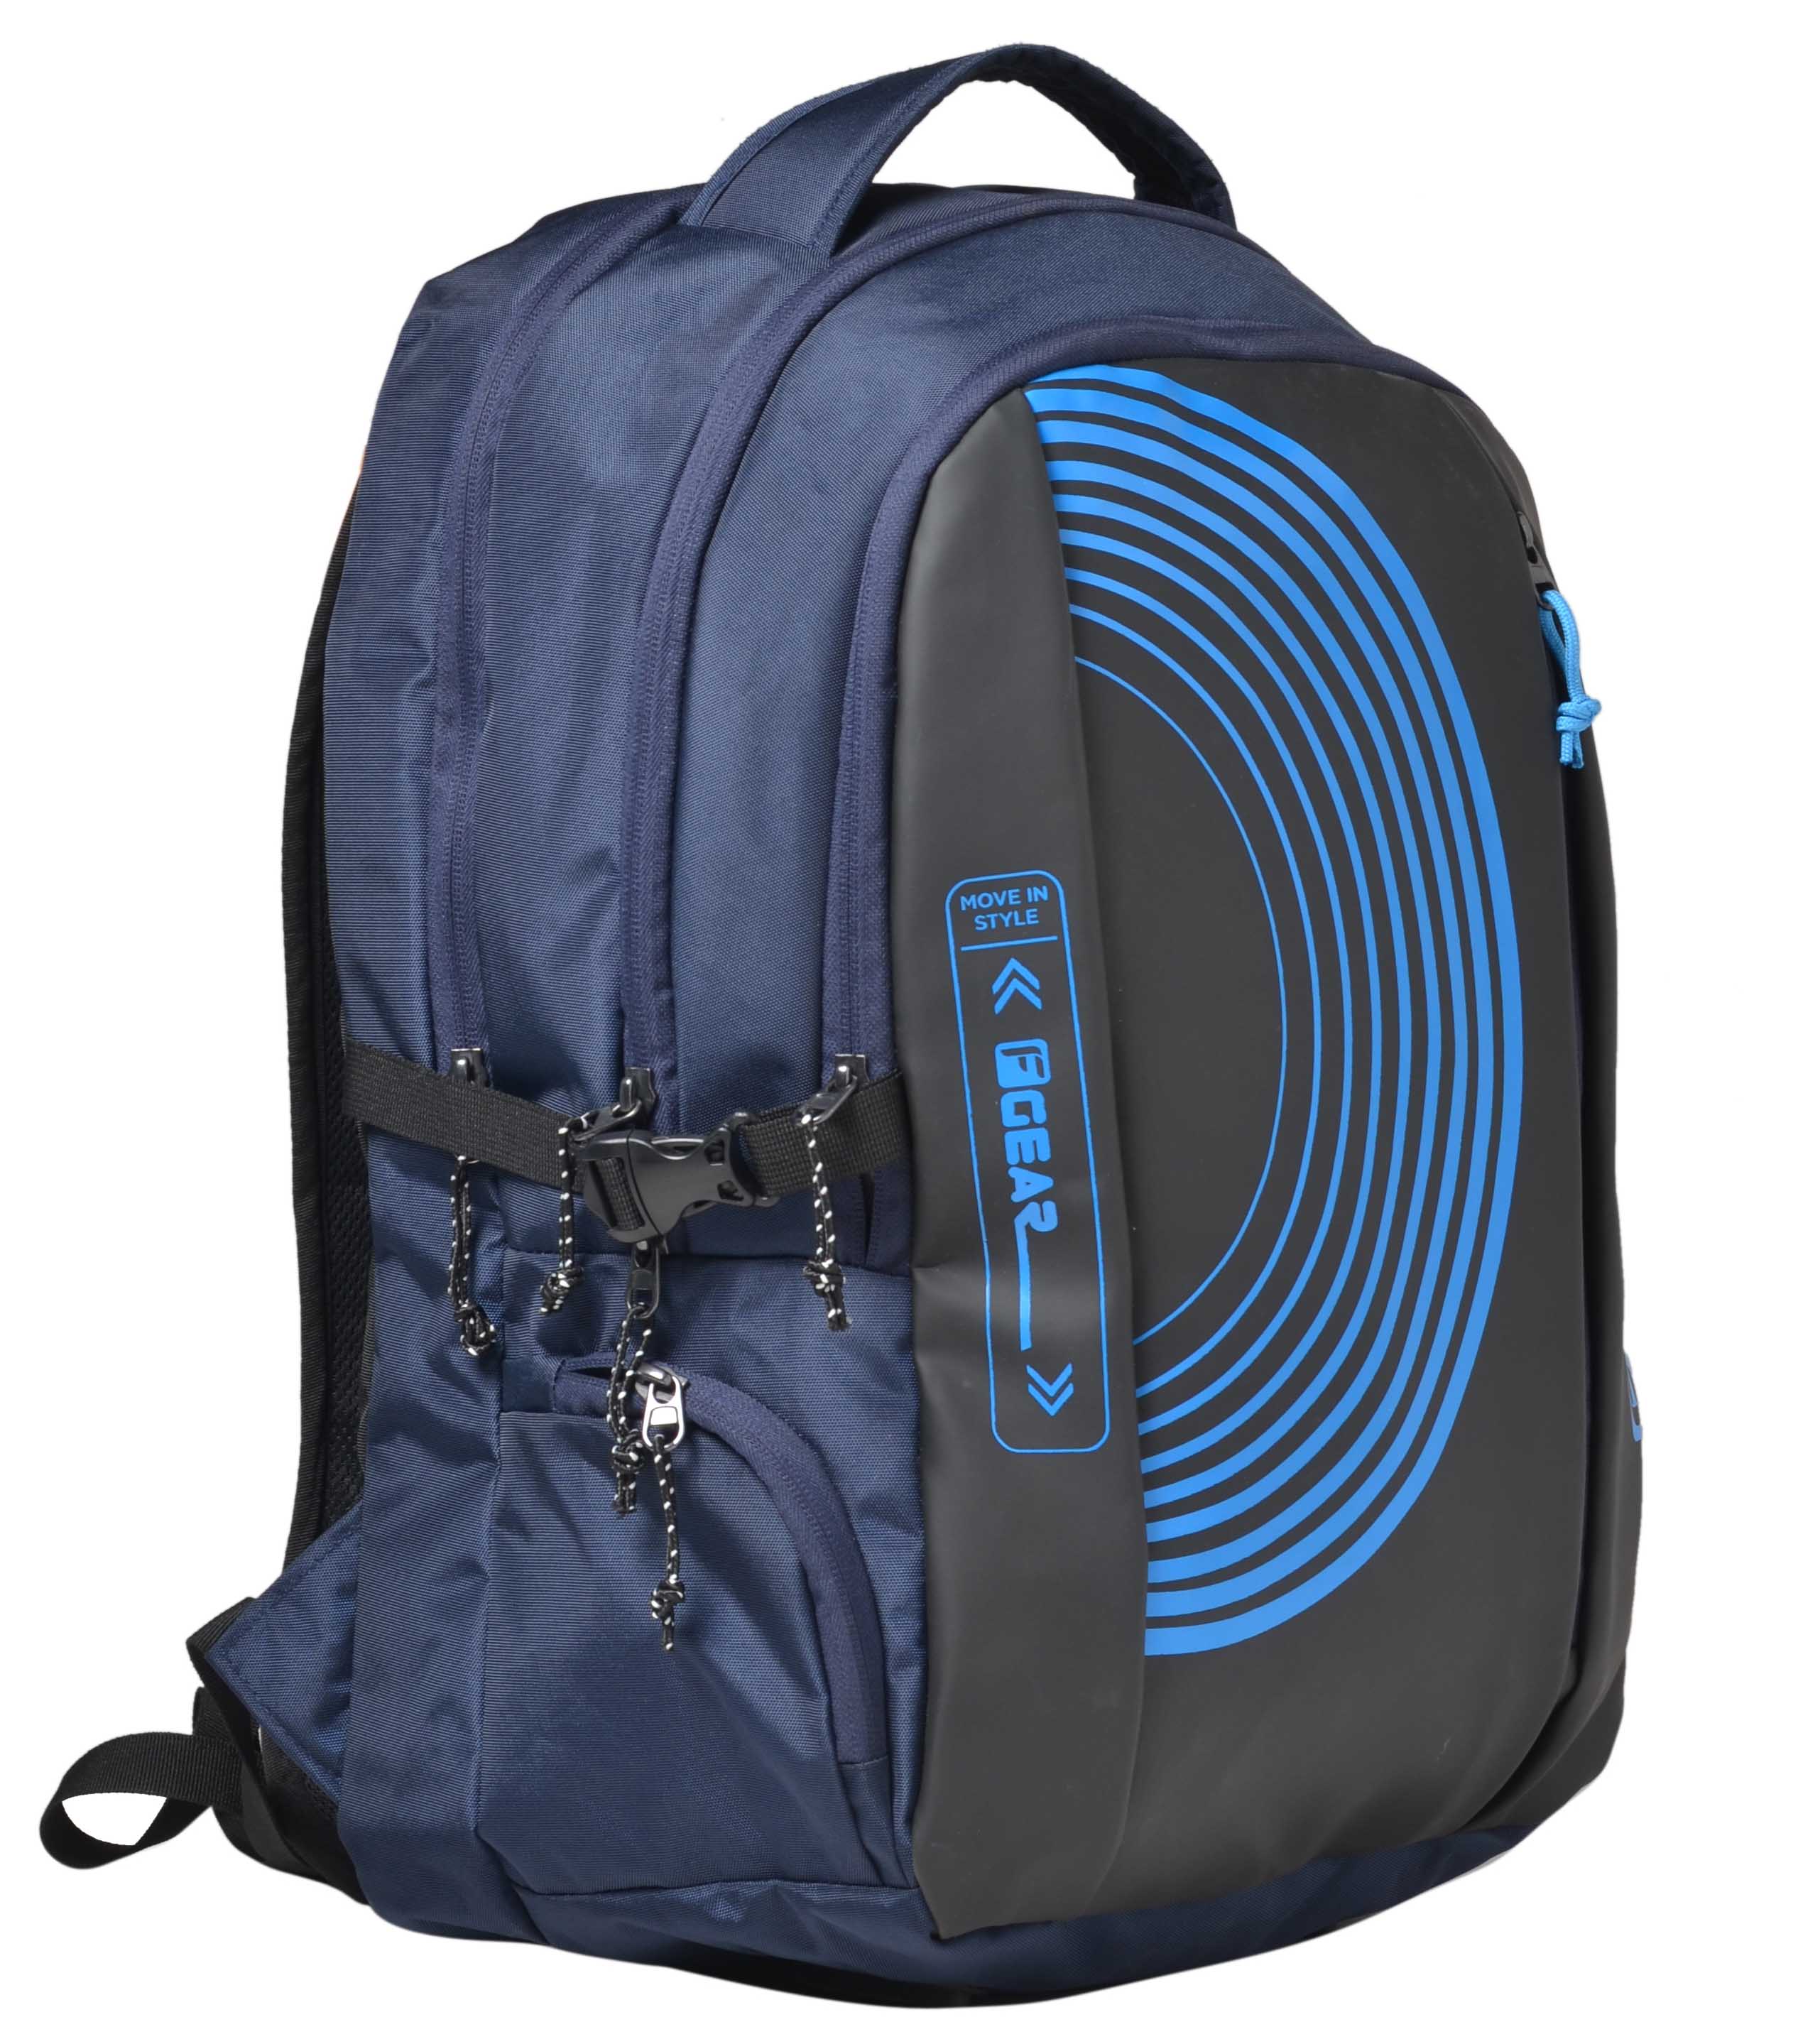 Buy F Gear Alchemist 30 Liters Backpack With Rain Cover (Grey,Blue) Sch ...